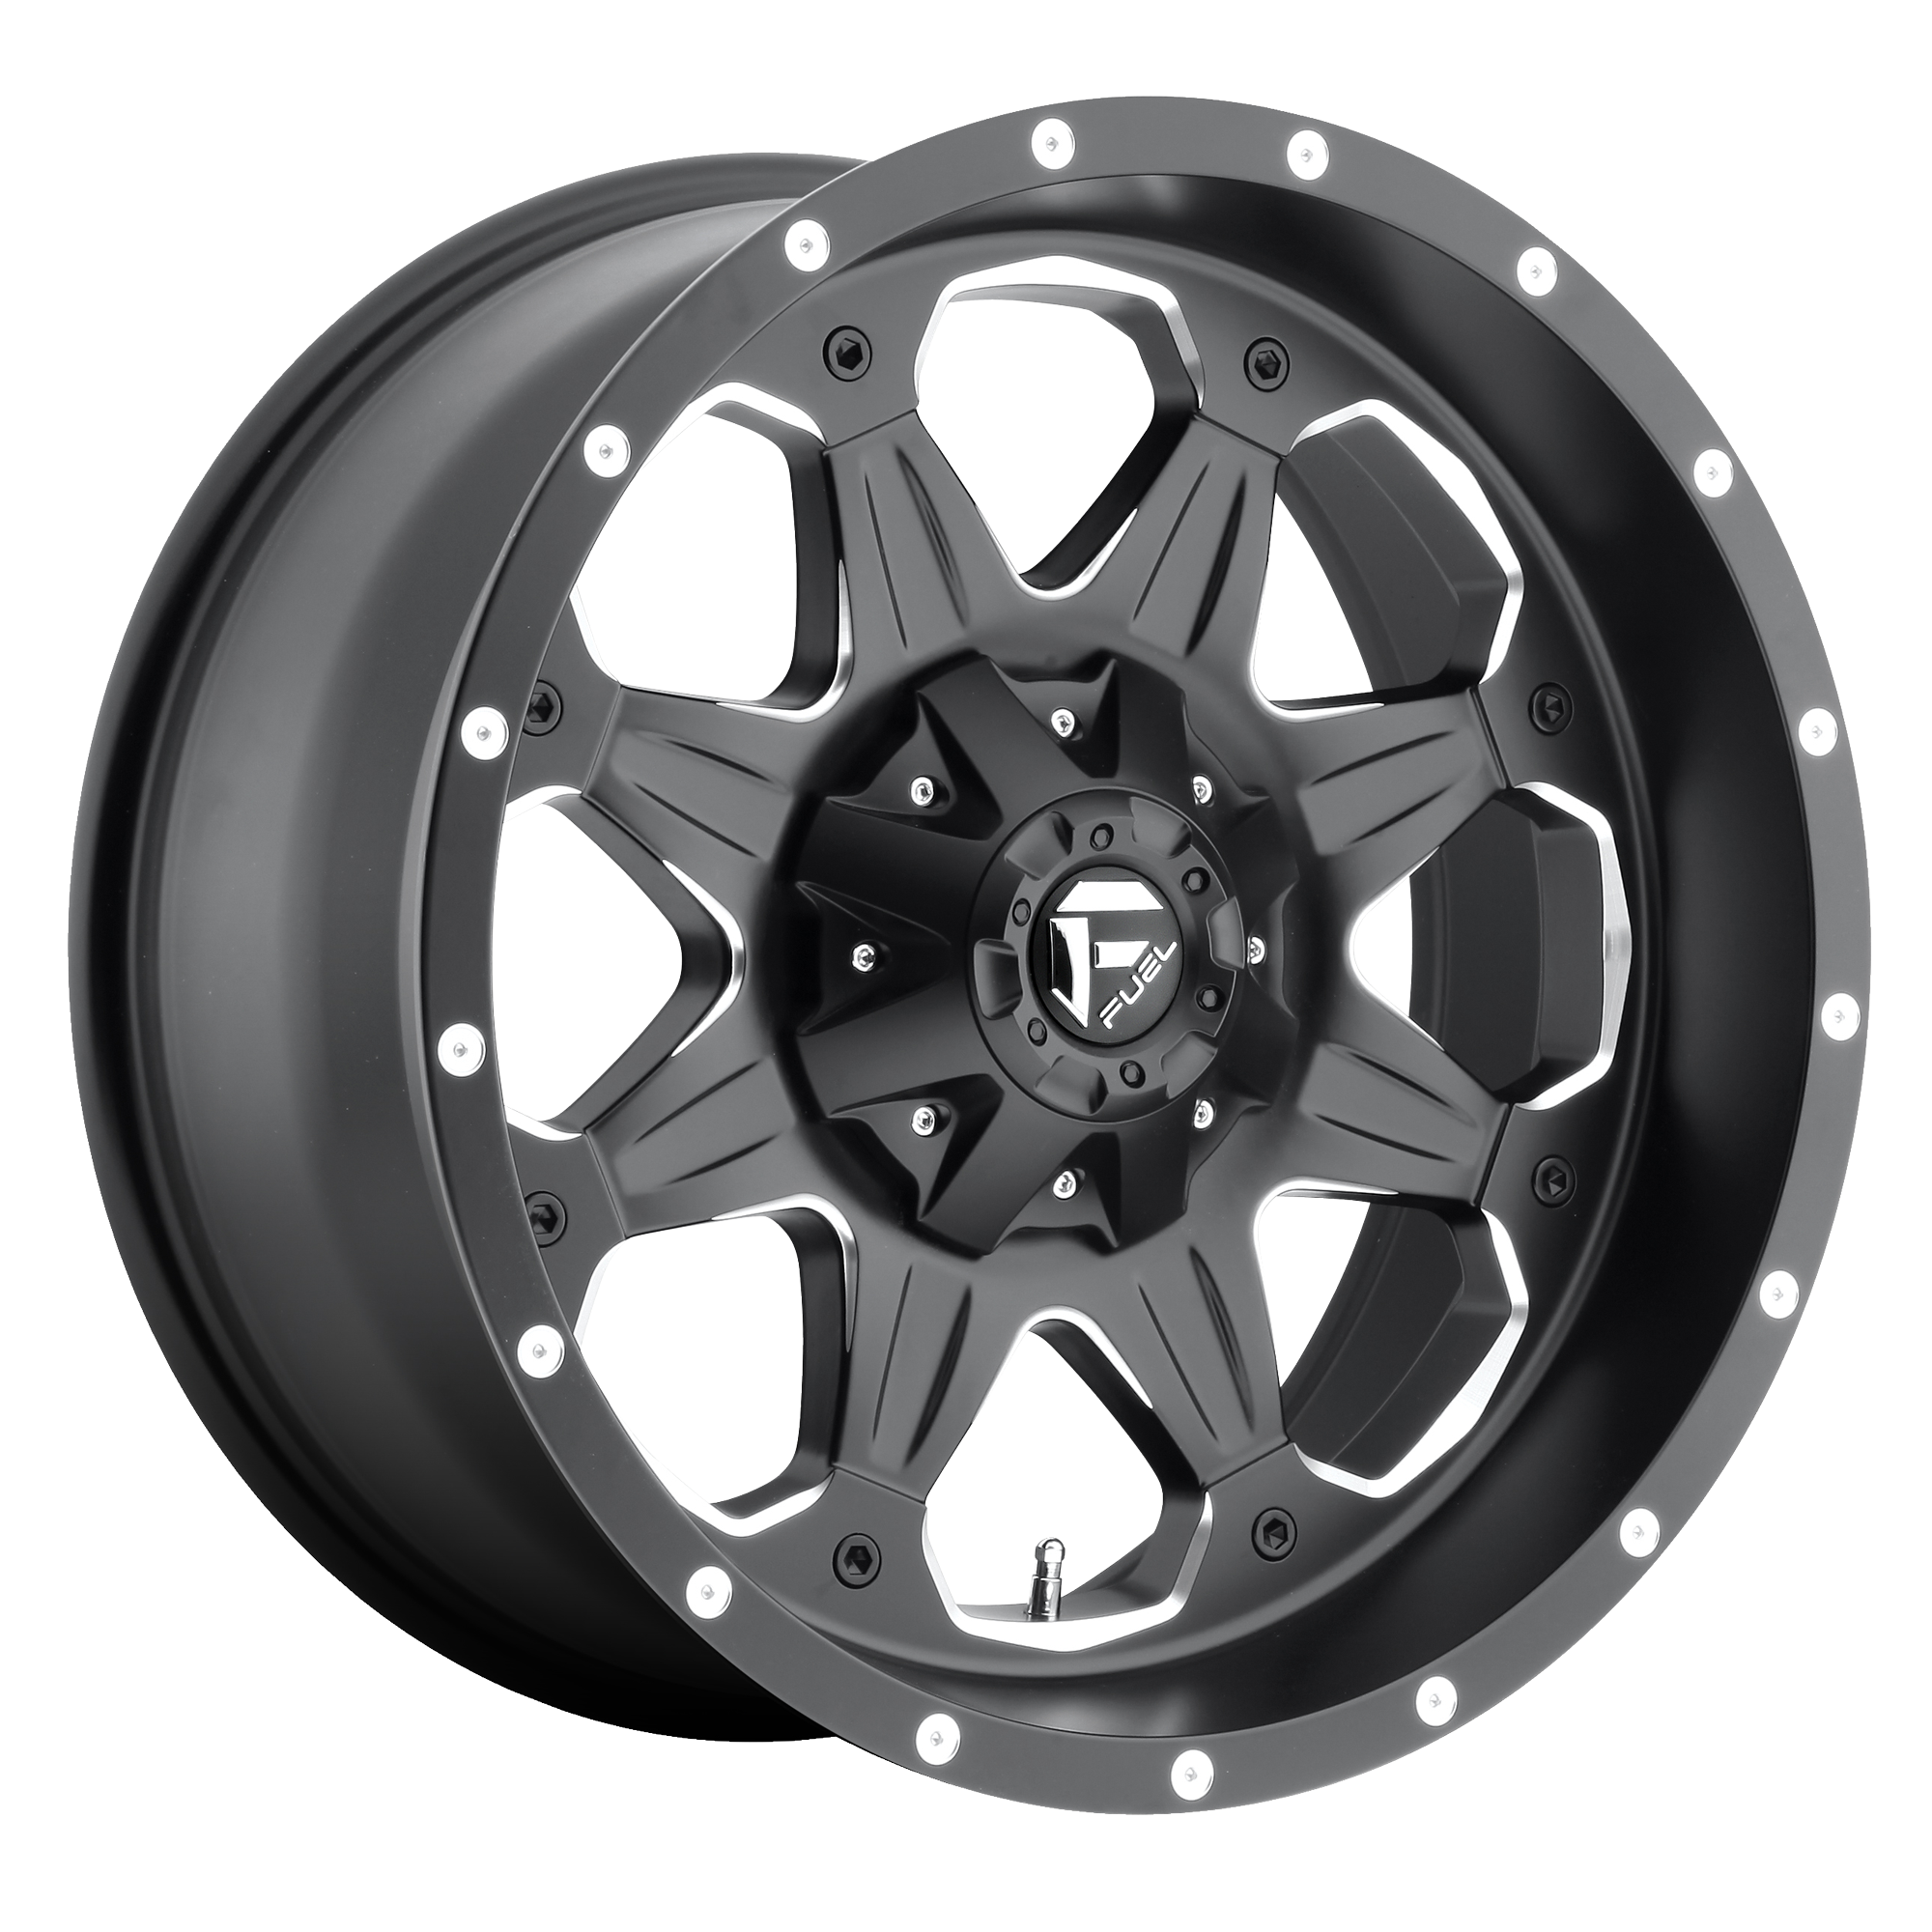 BOOST 16x8 6x139.70 MATTE BLACK MILLED (1 mm) - Tires and Engine Performance